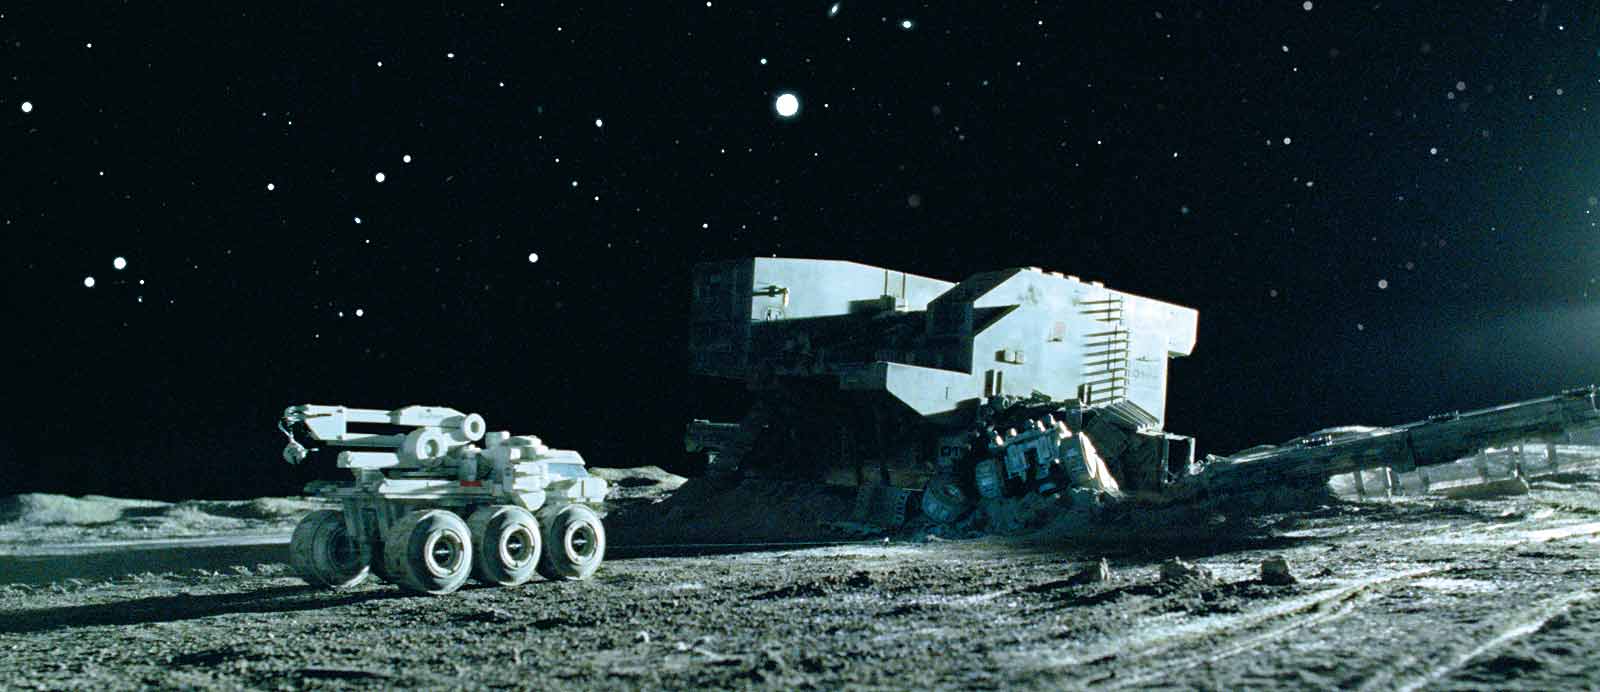 Screenshot of a moonbase and rover from the overlooked movie "Moon".